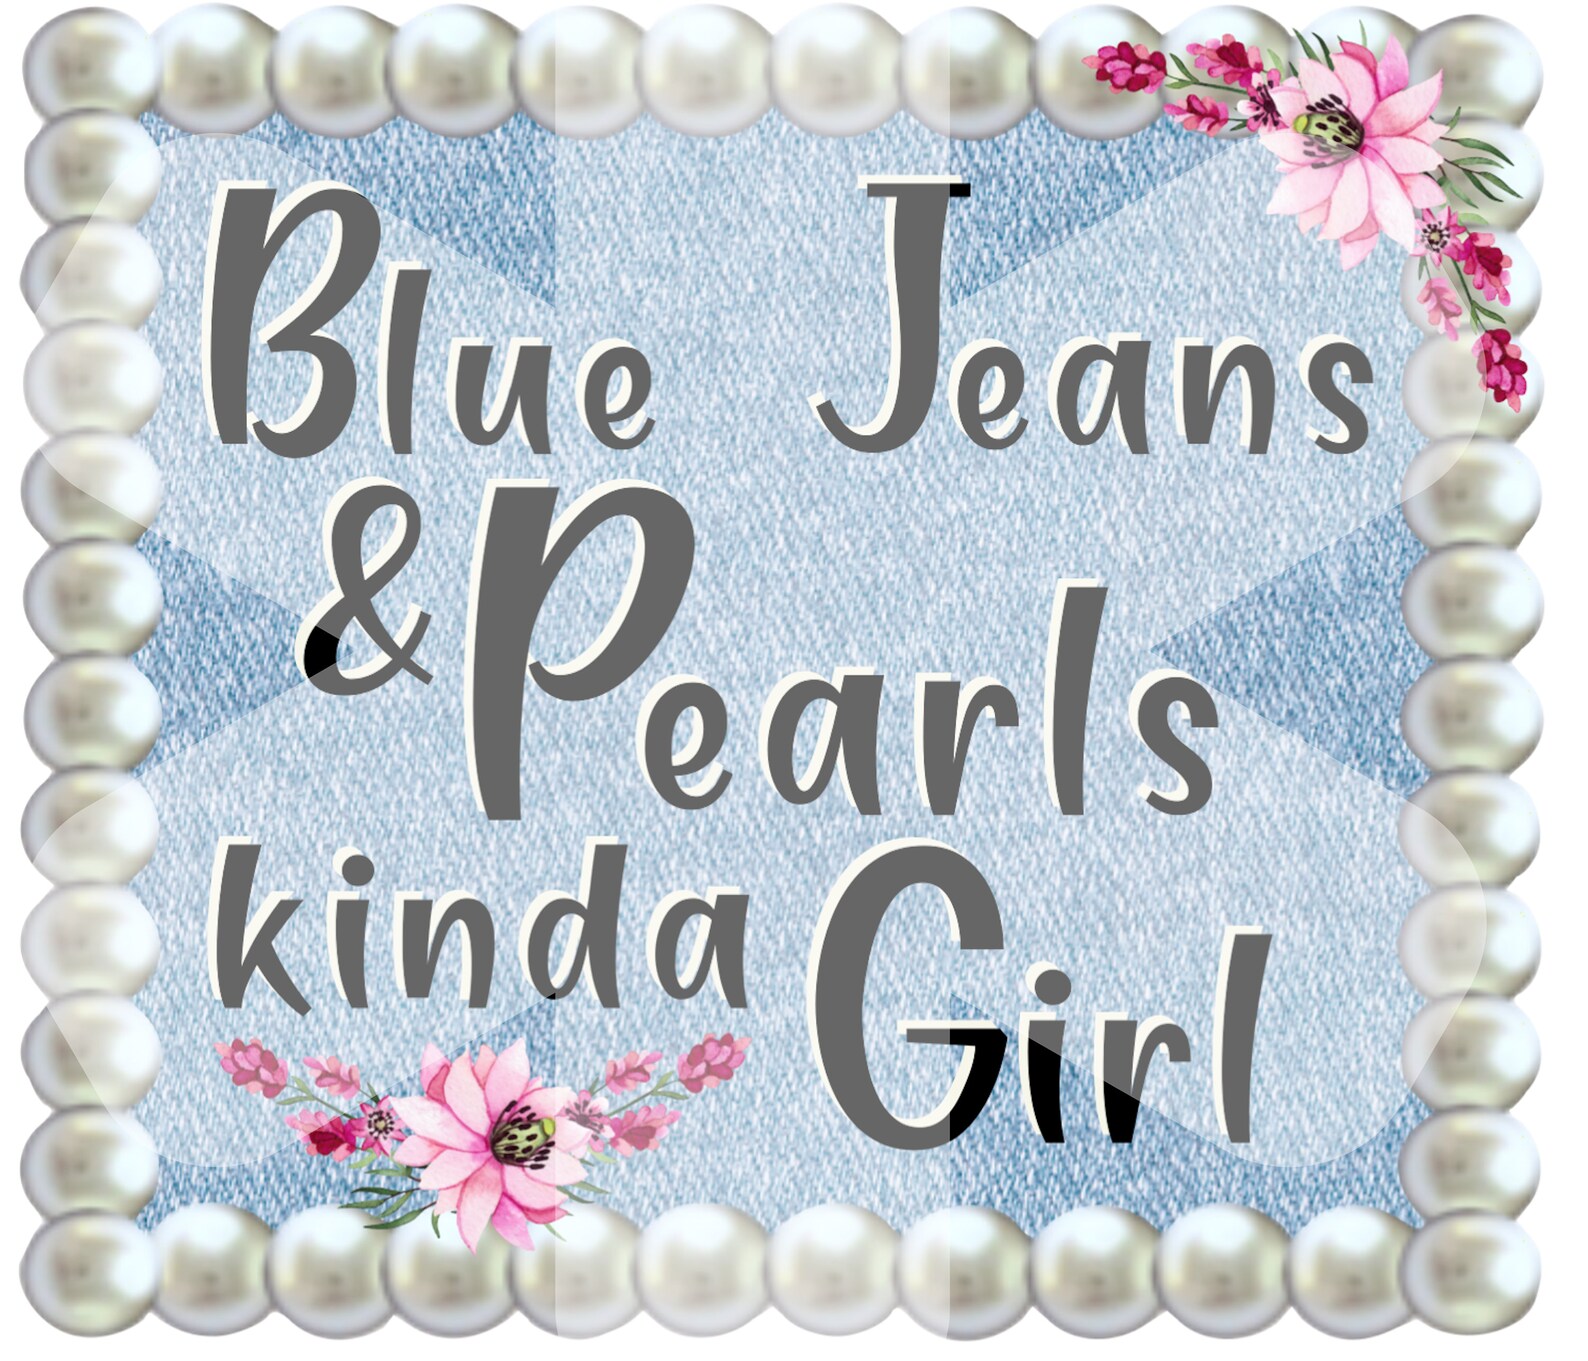 Blue Jeans and Pearls Kinda Girl, PNG, INSTANT DOWNLOAD, Sublimation ...